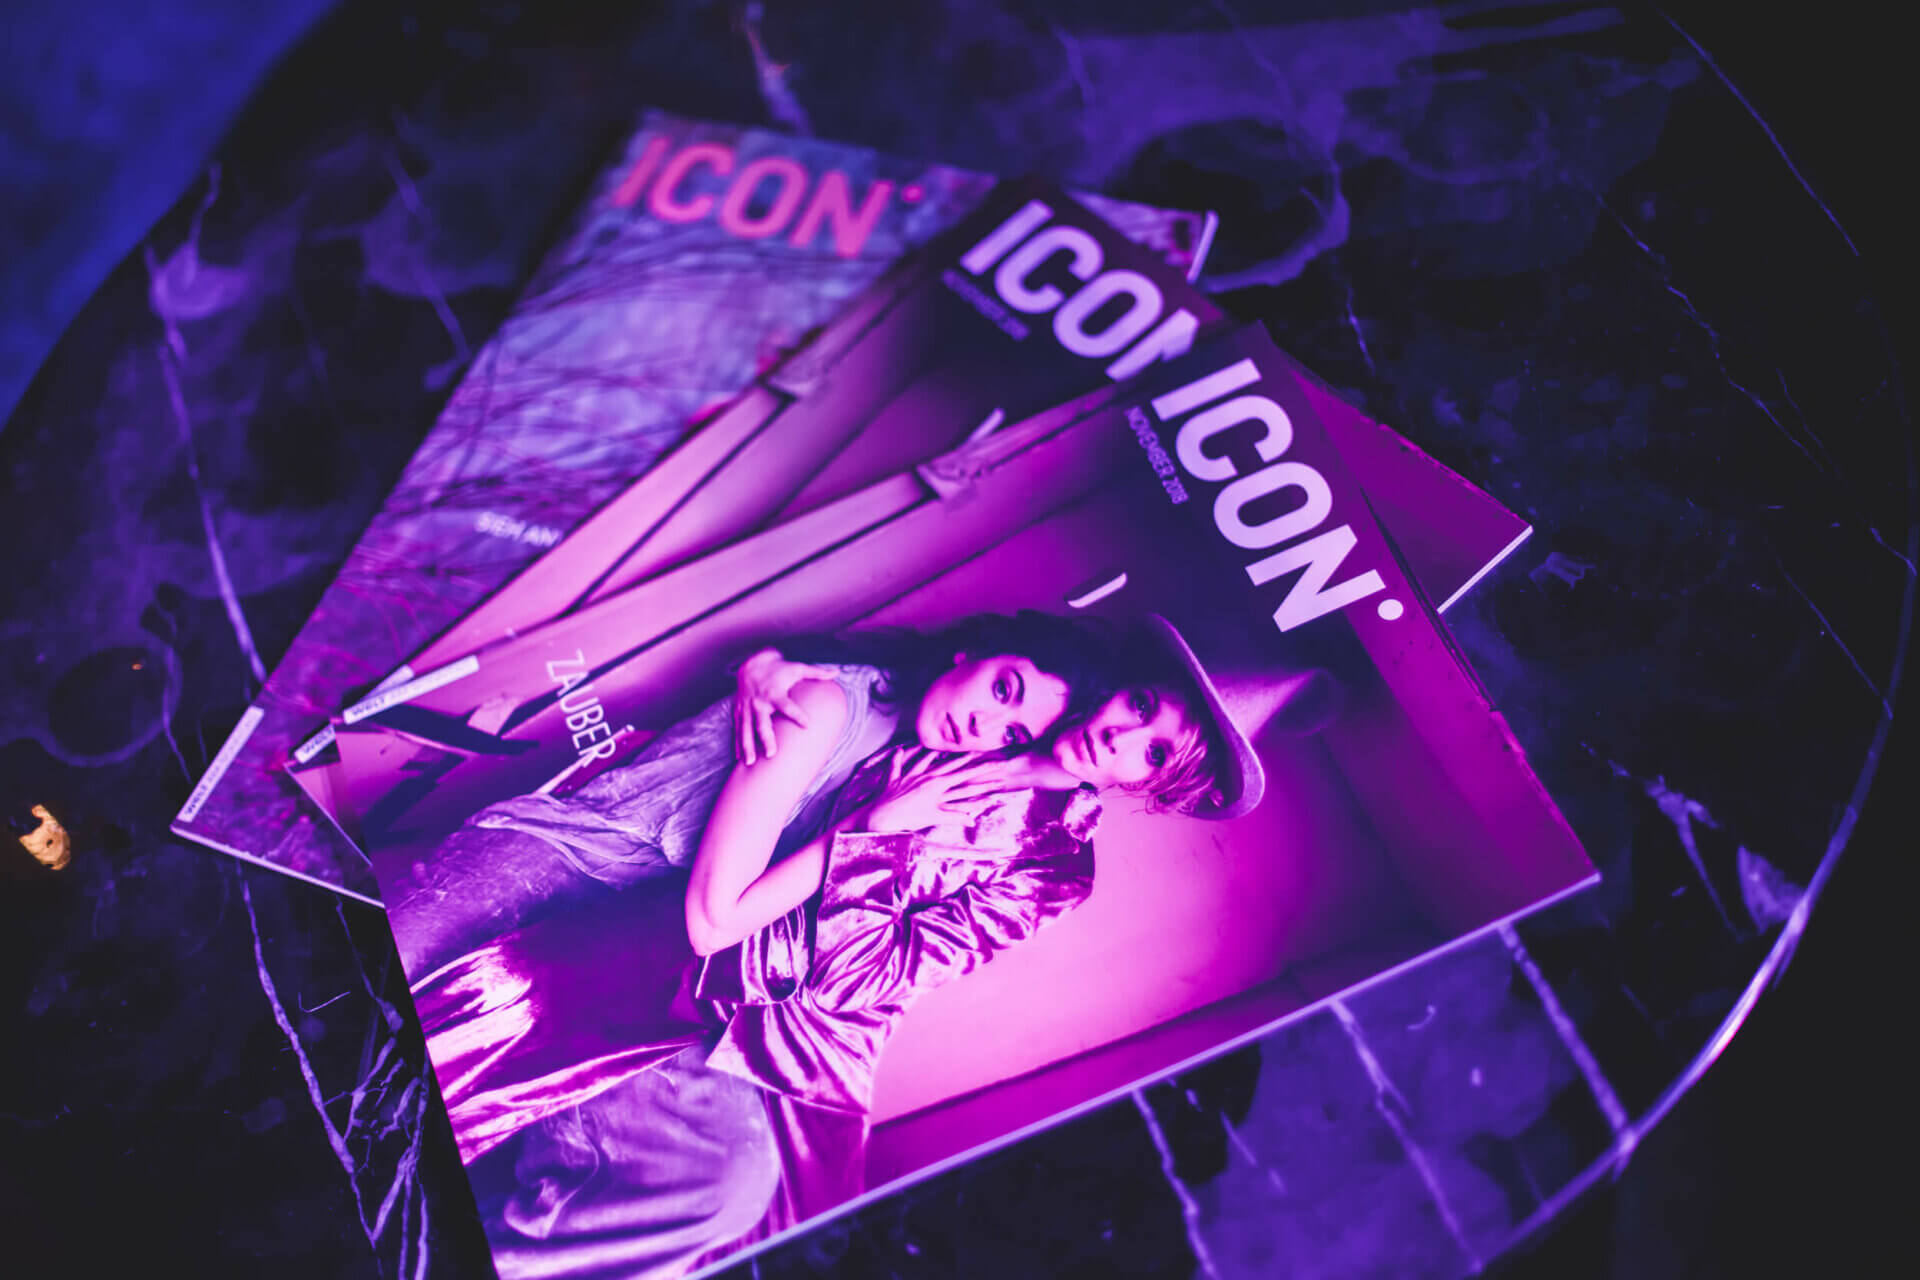 Iconist Event 2018 Provocateur Berlin